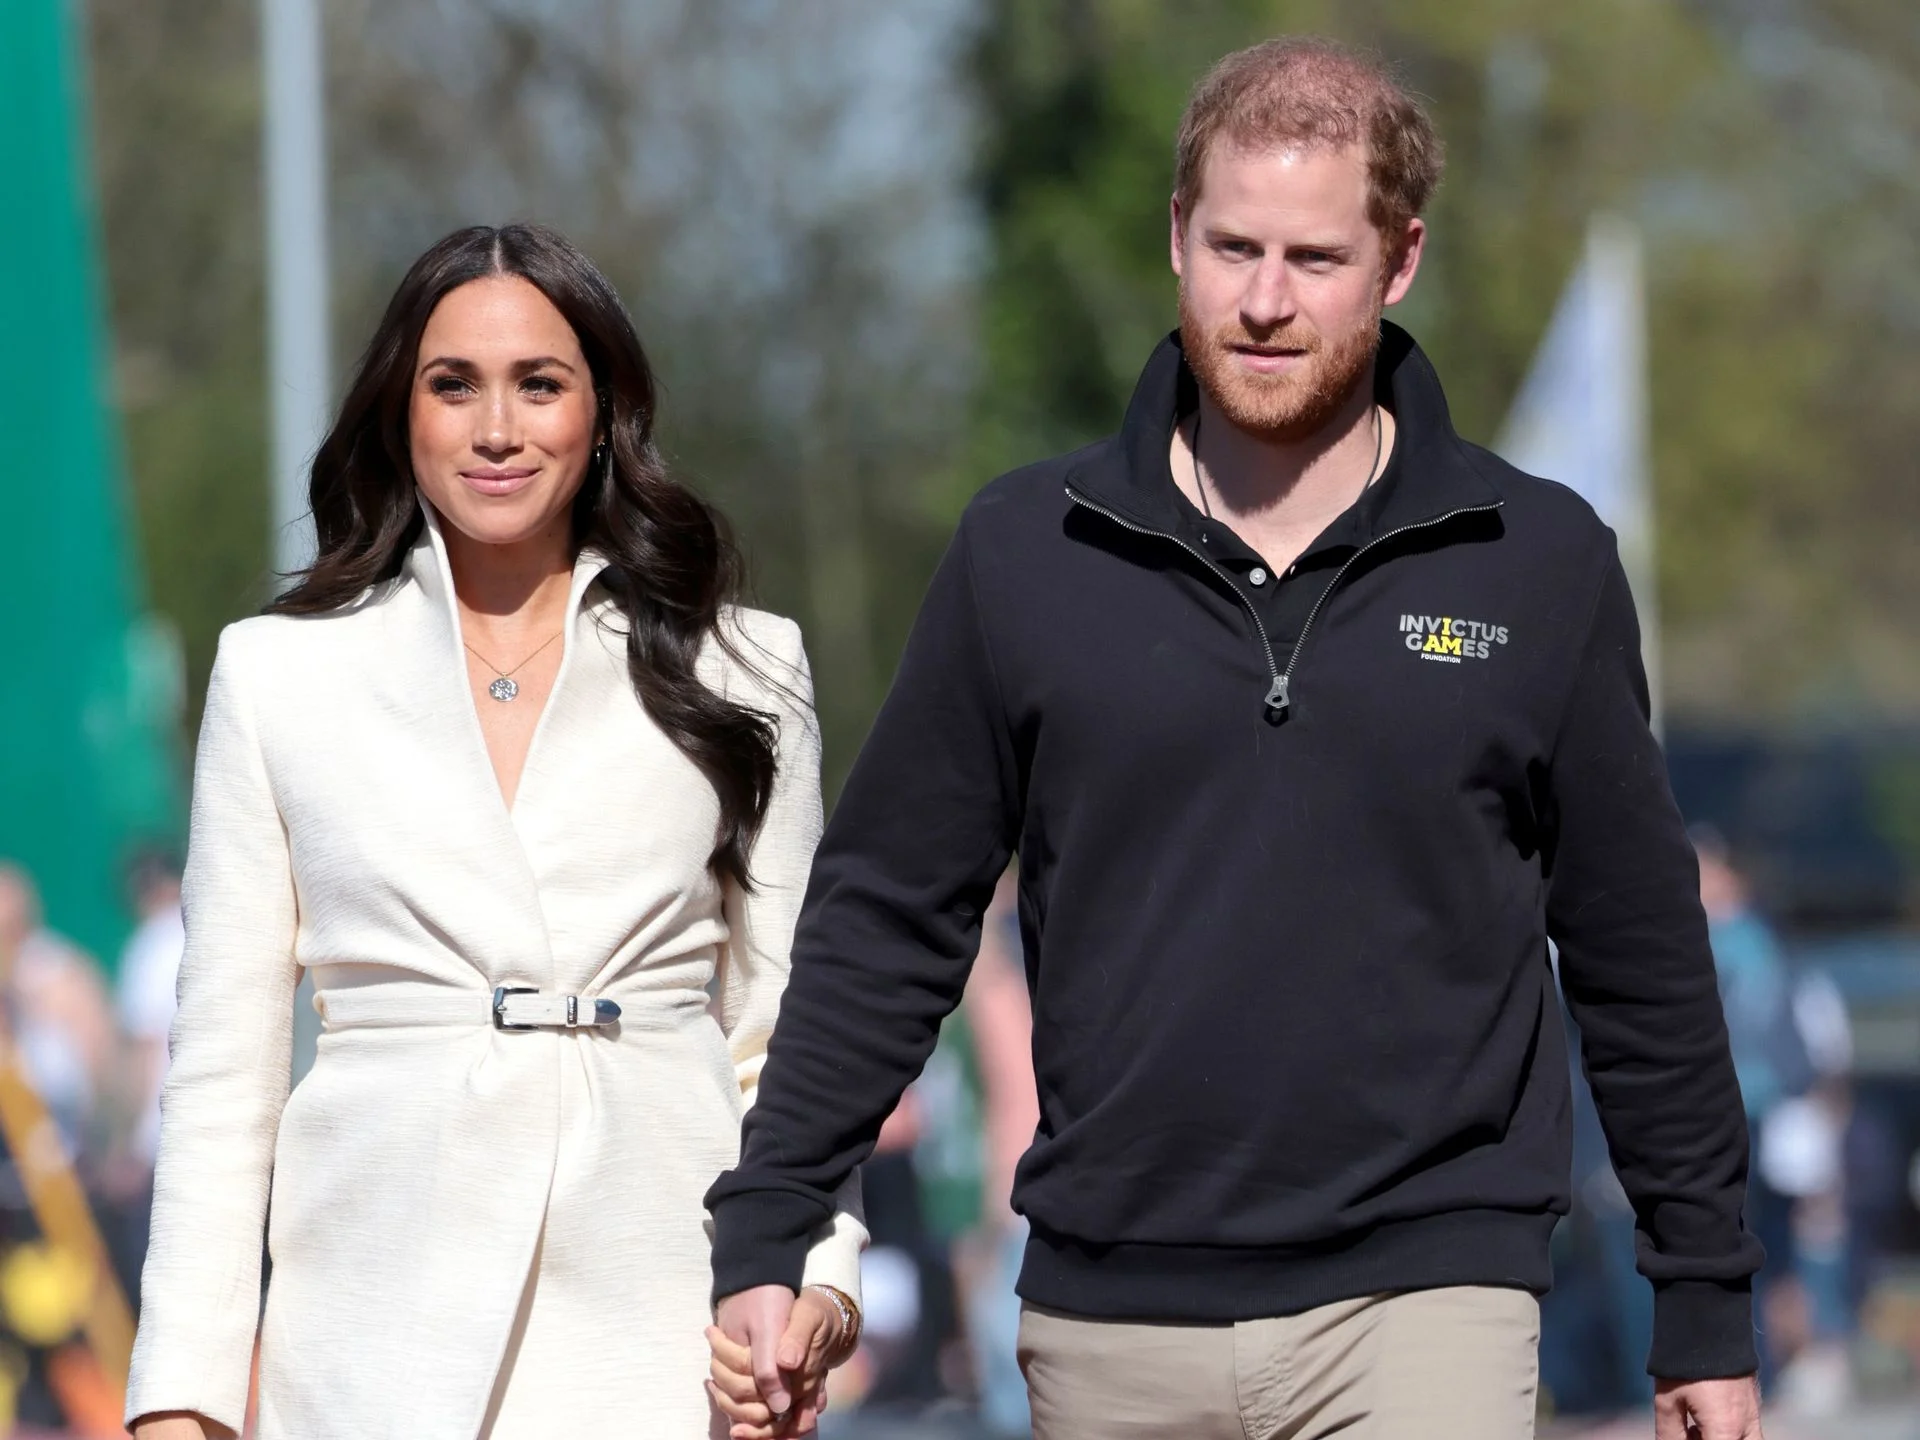 Meghan Markle may not be accompanying Harry to the UK for the Invictus Games event because she is afraid that she will be booed by the British public again, a royal expert has said.